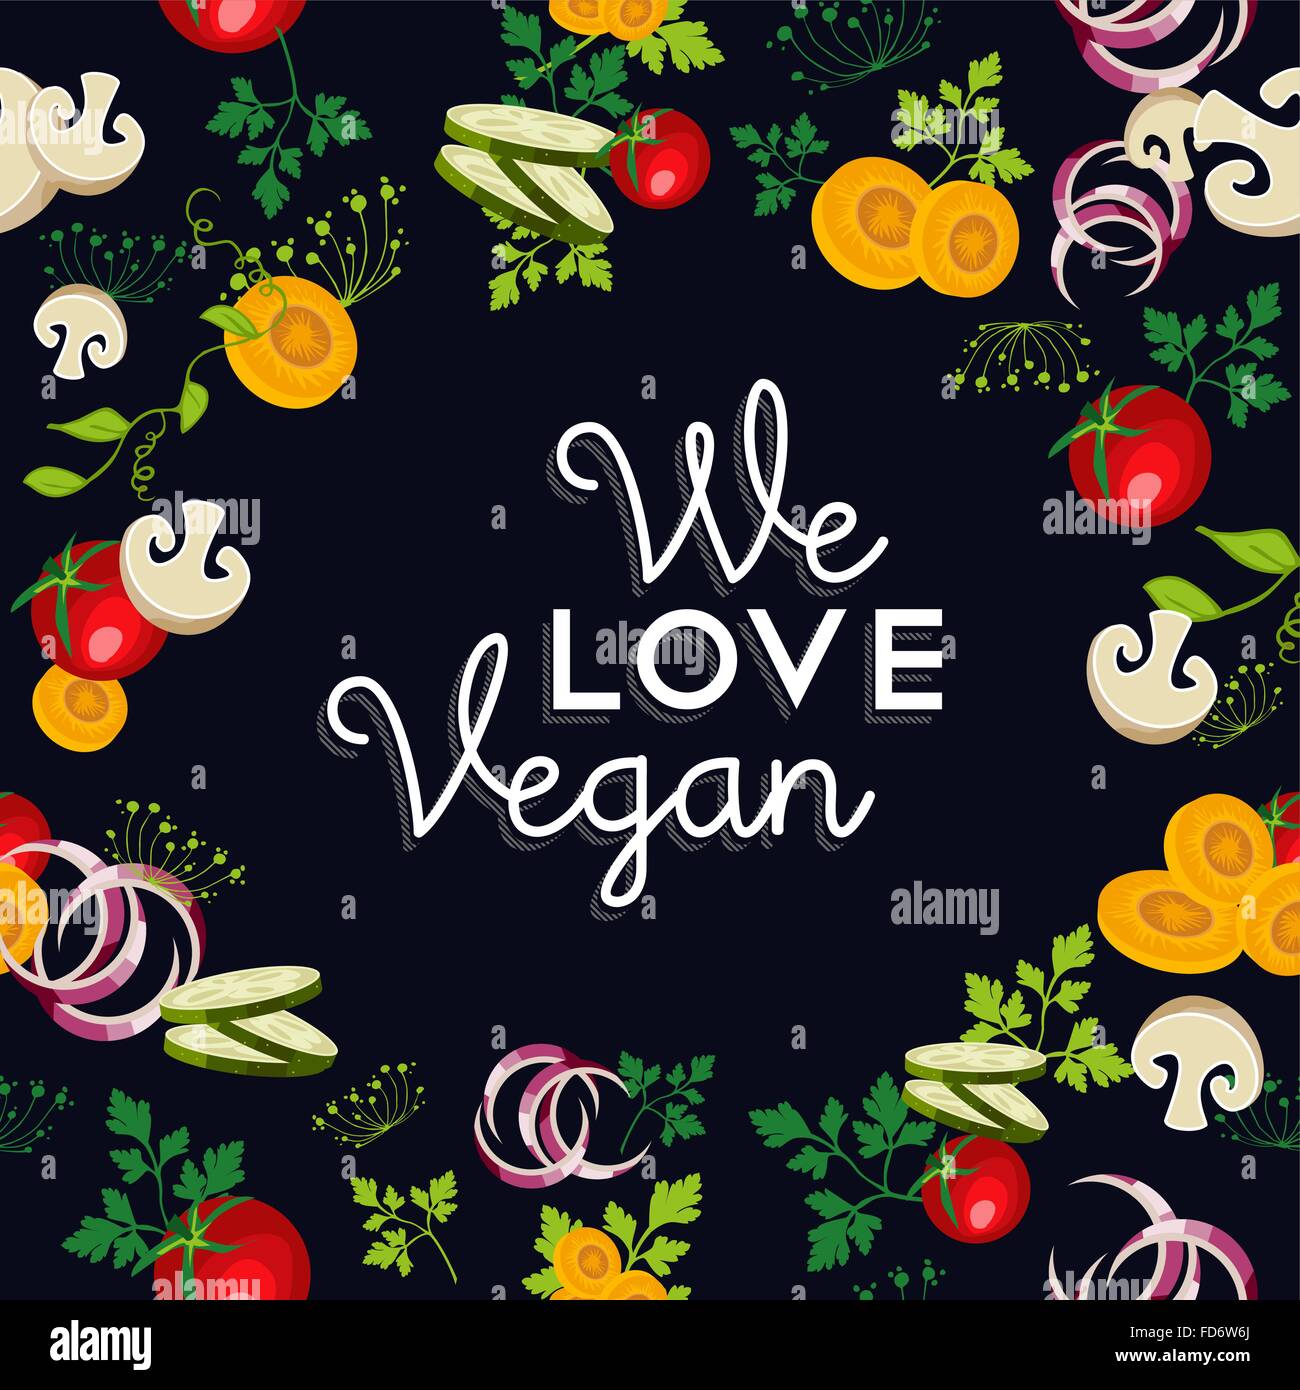 We love vegan food text with raw vegetables and ingredients illustration. EPS10 vector. Stock Vector